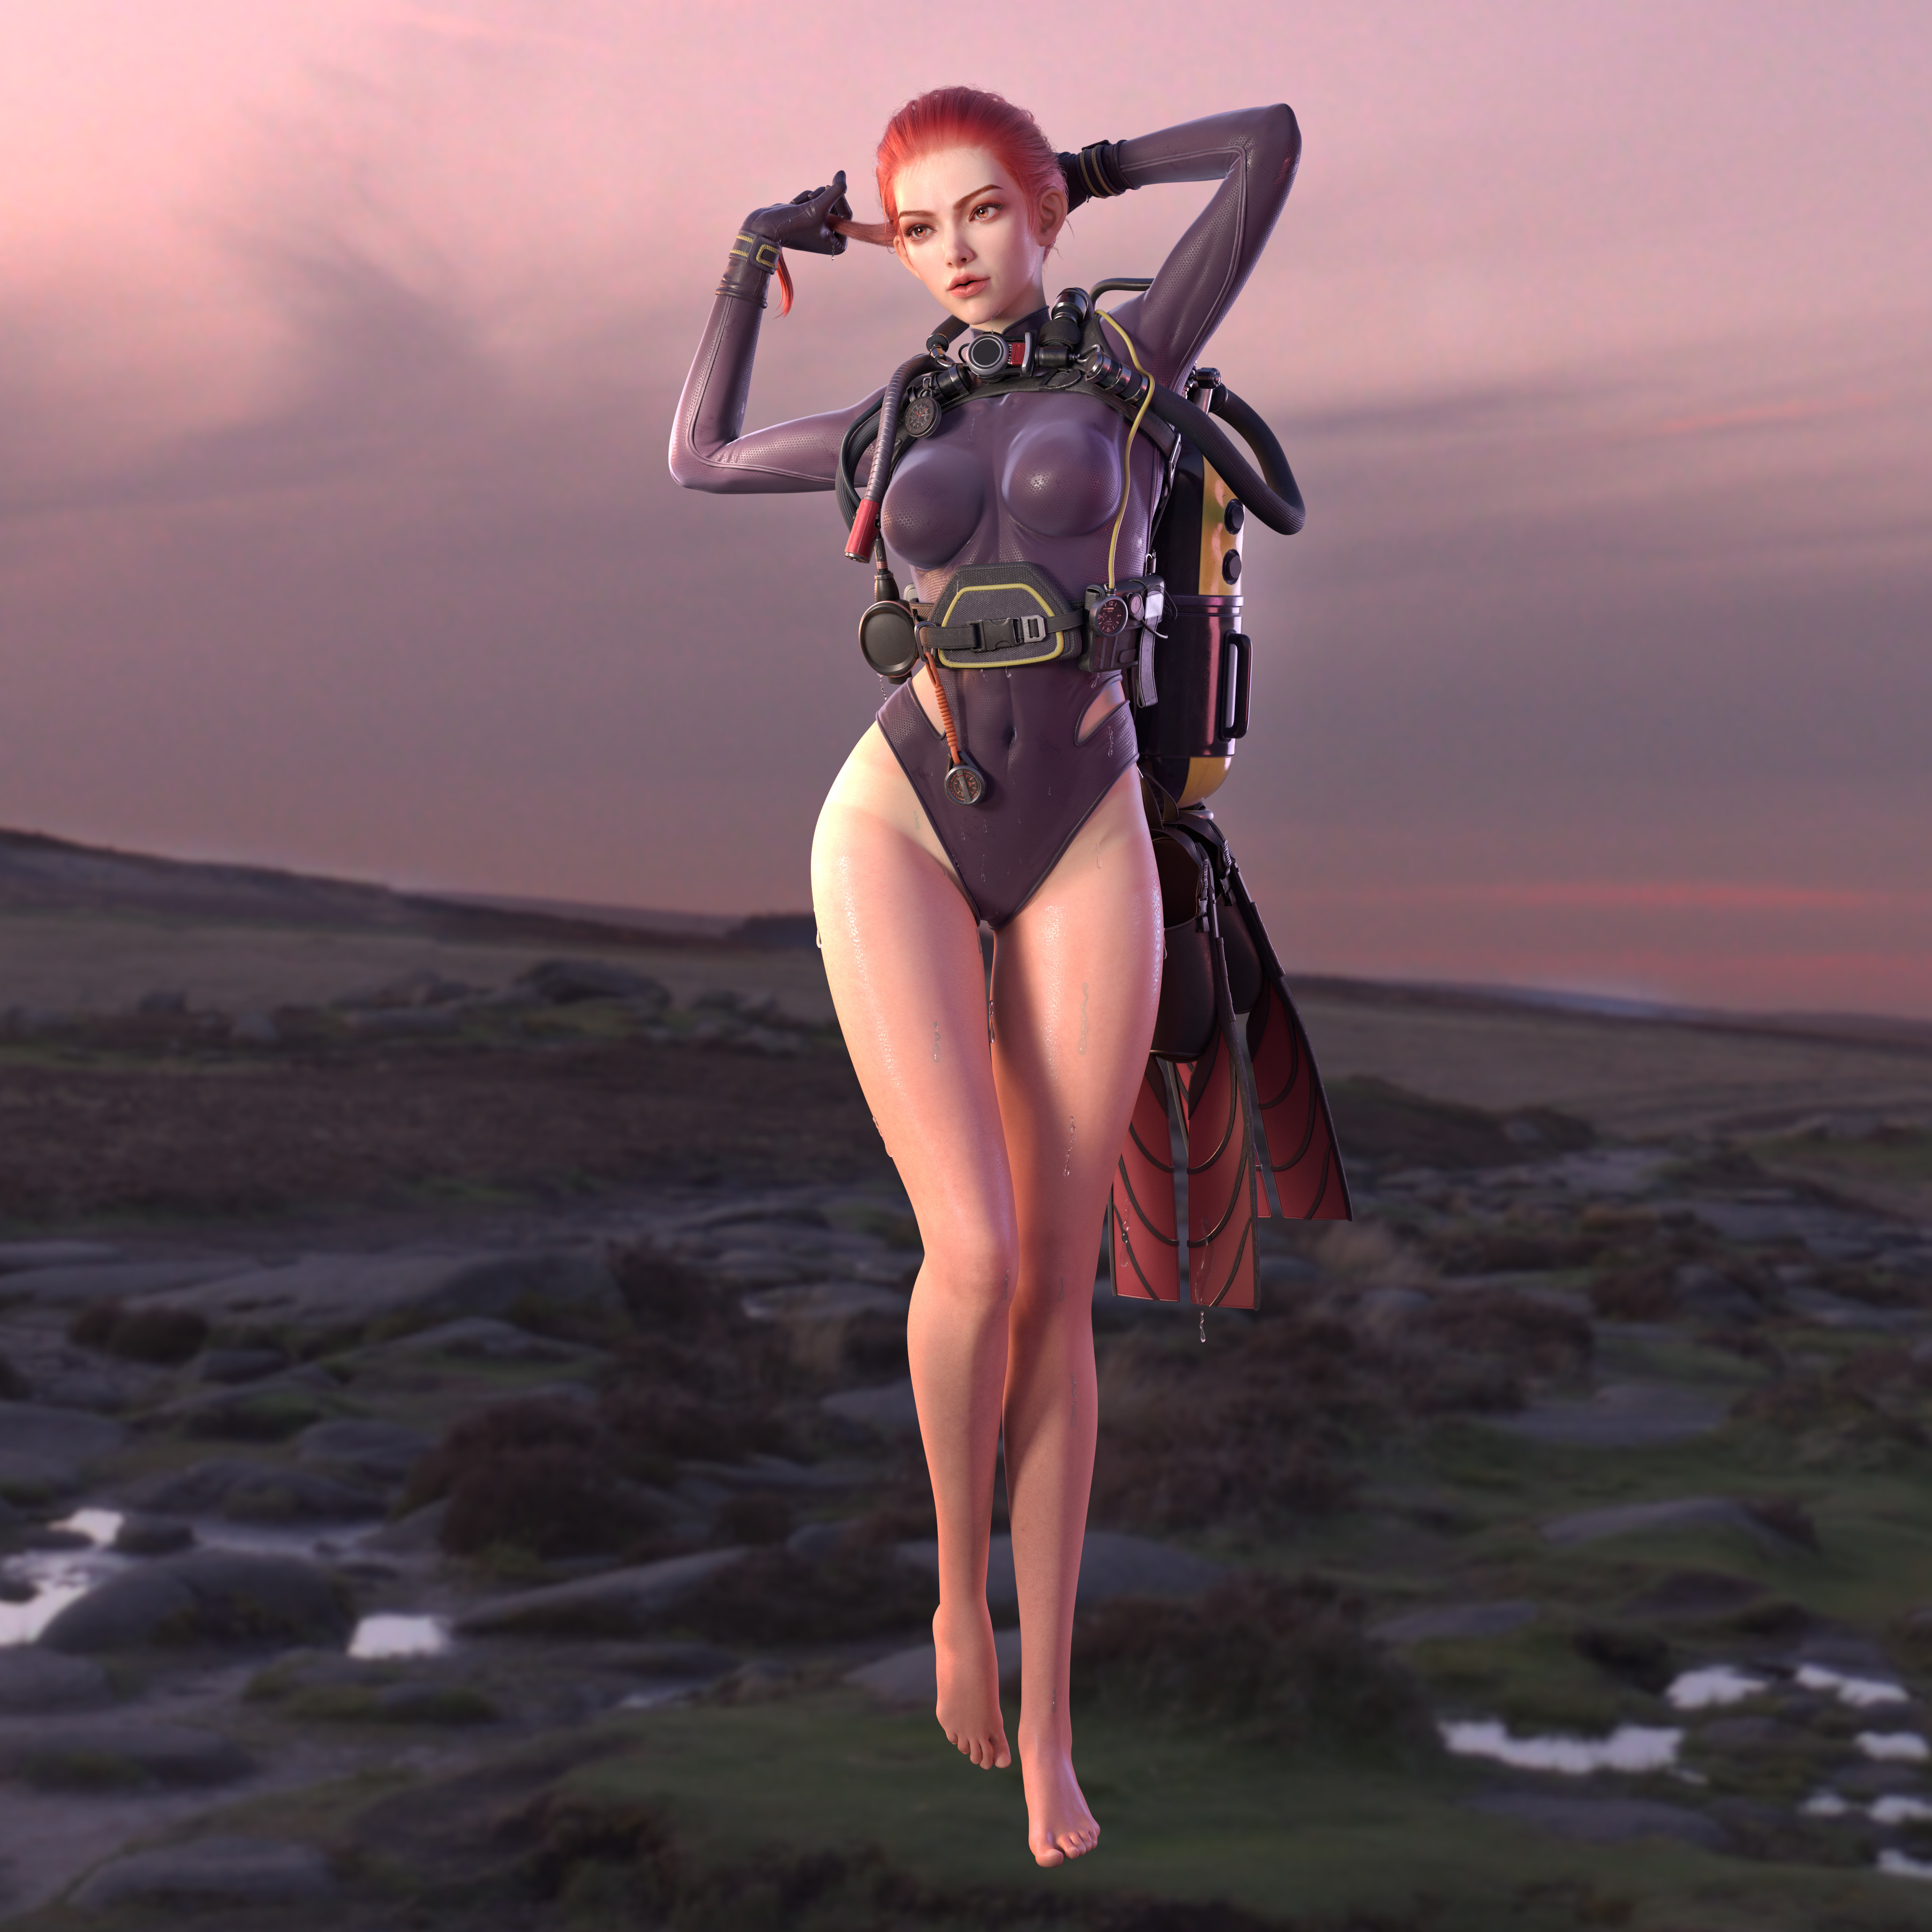 General 3840x3840 Owen Q CGI women redhead bodysuit tight clothing sky divers pointed toes